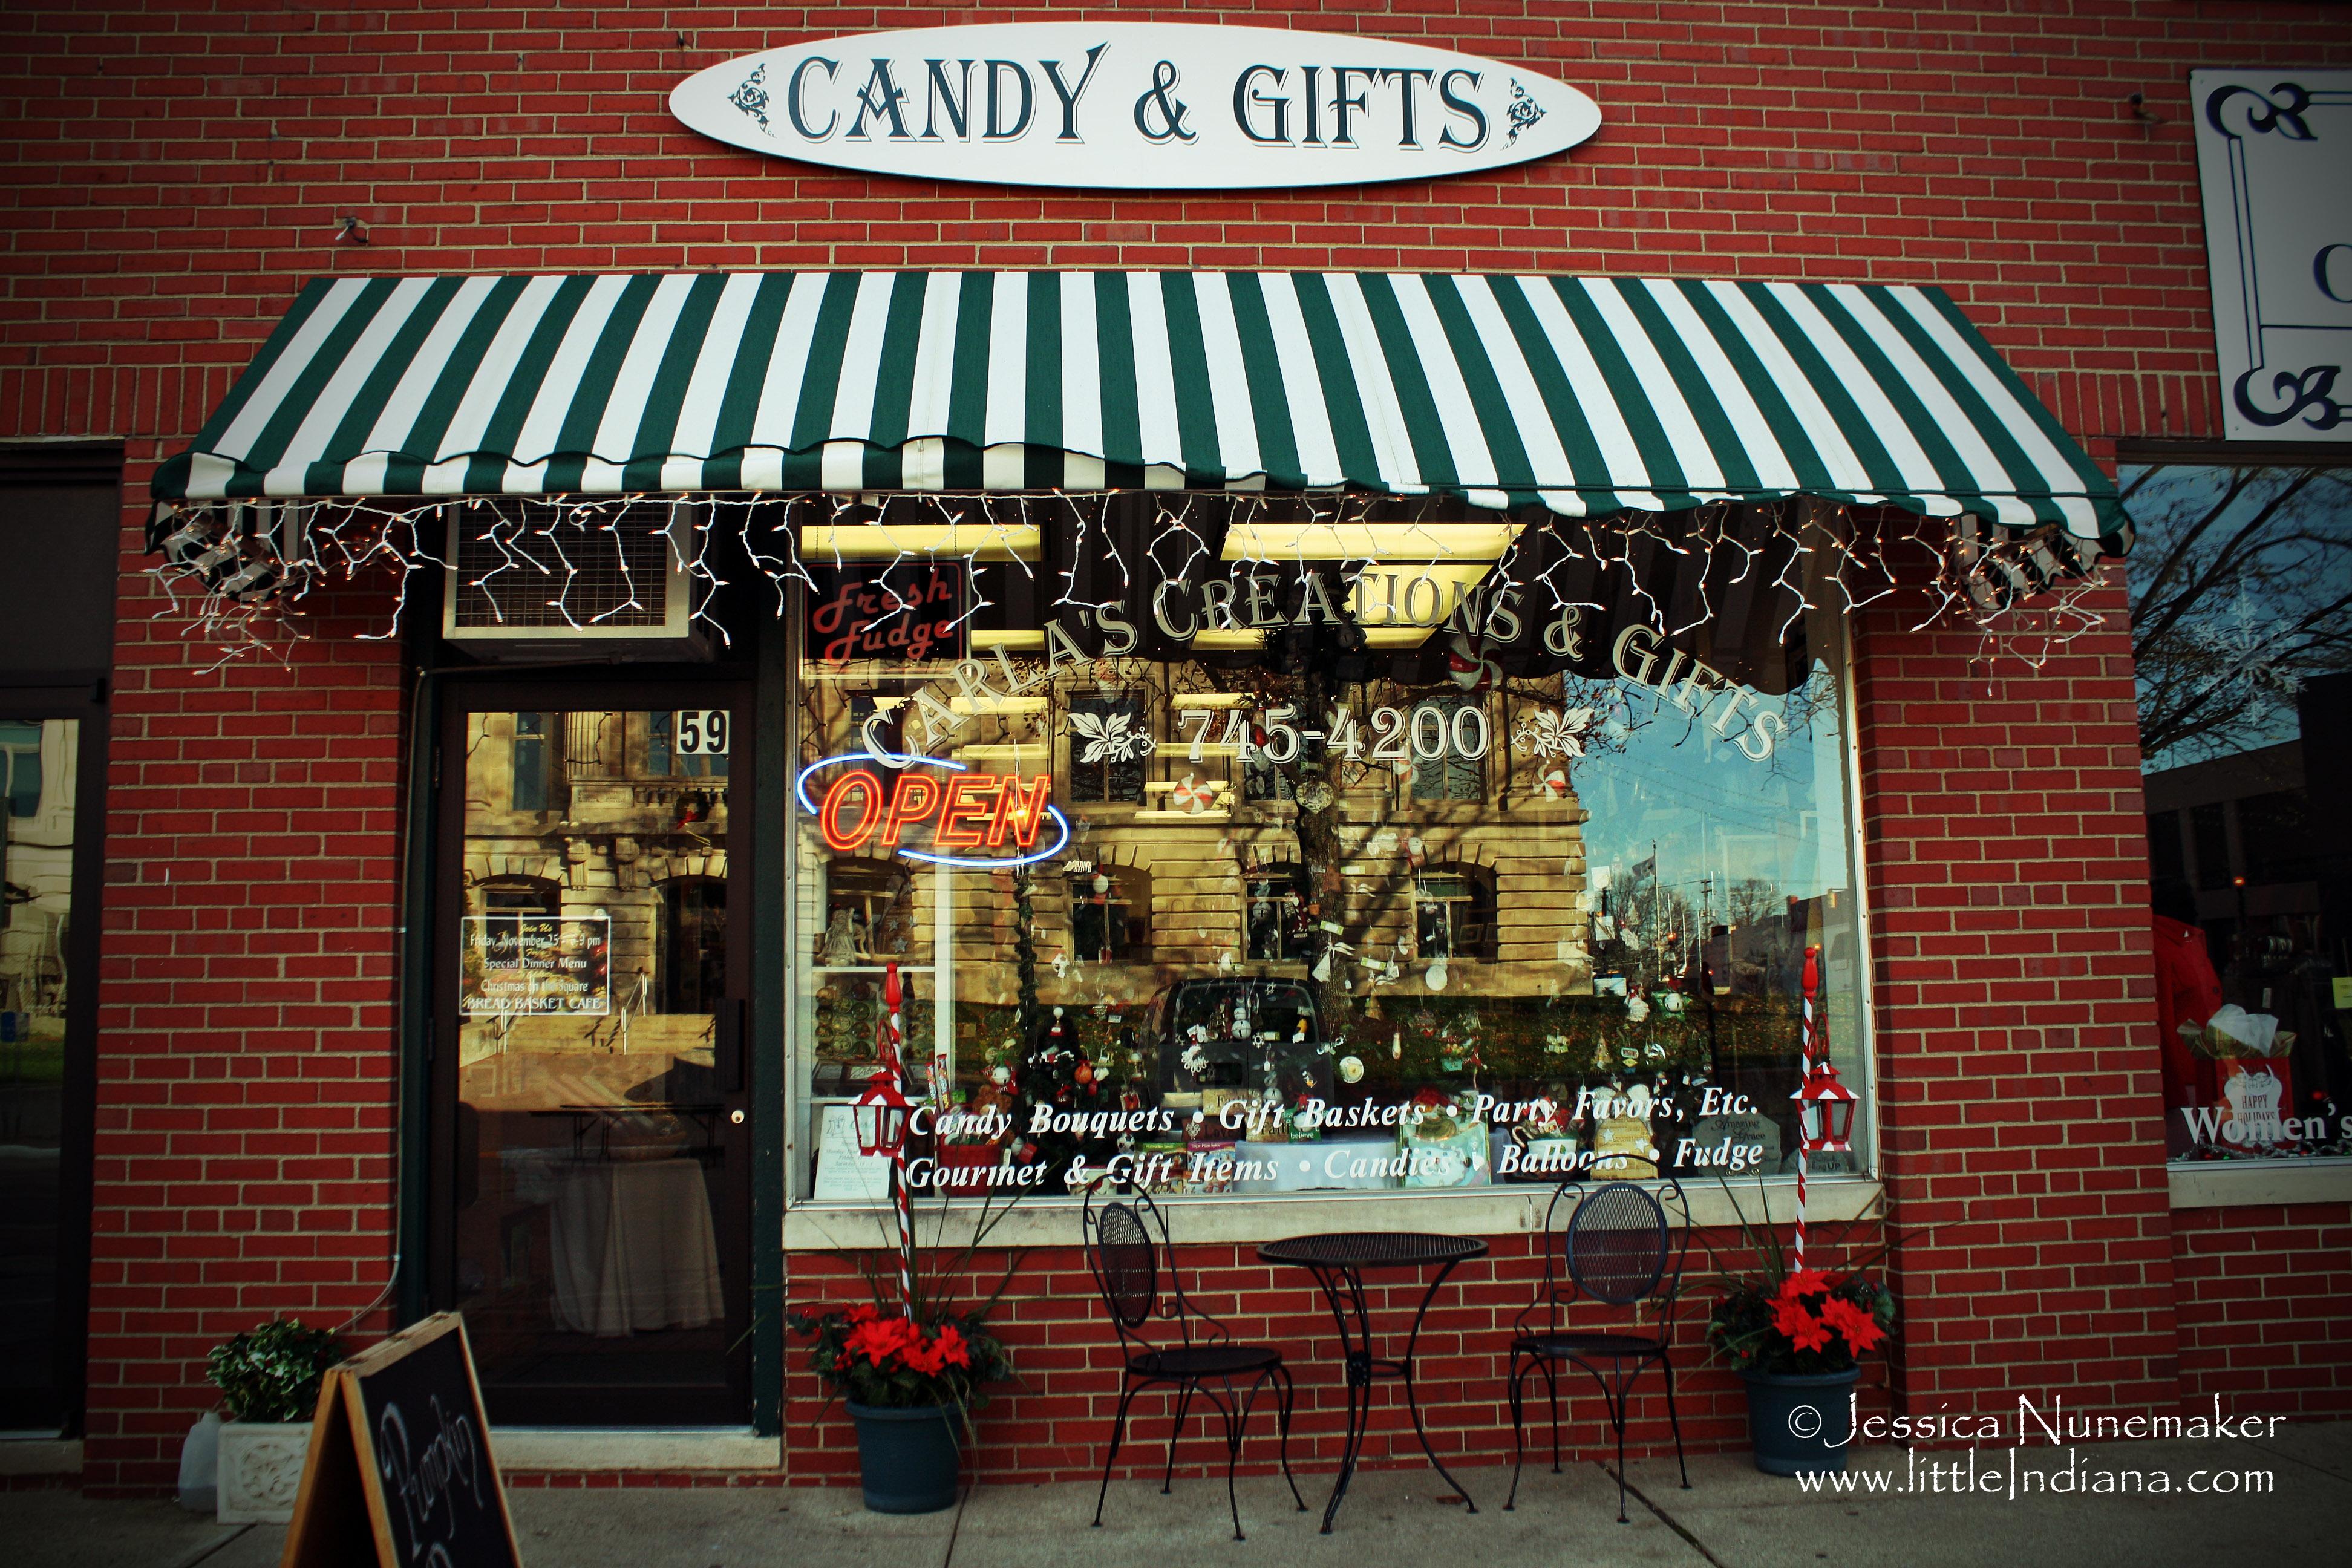 Carla's Creations and Gifts: Danville, Indiana